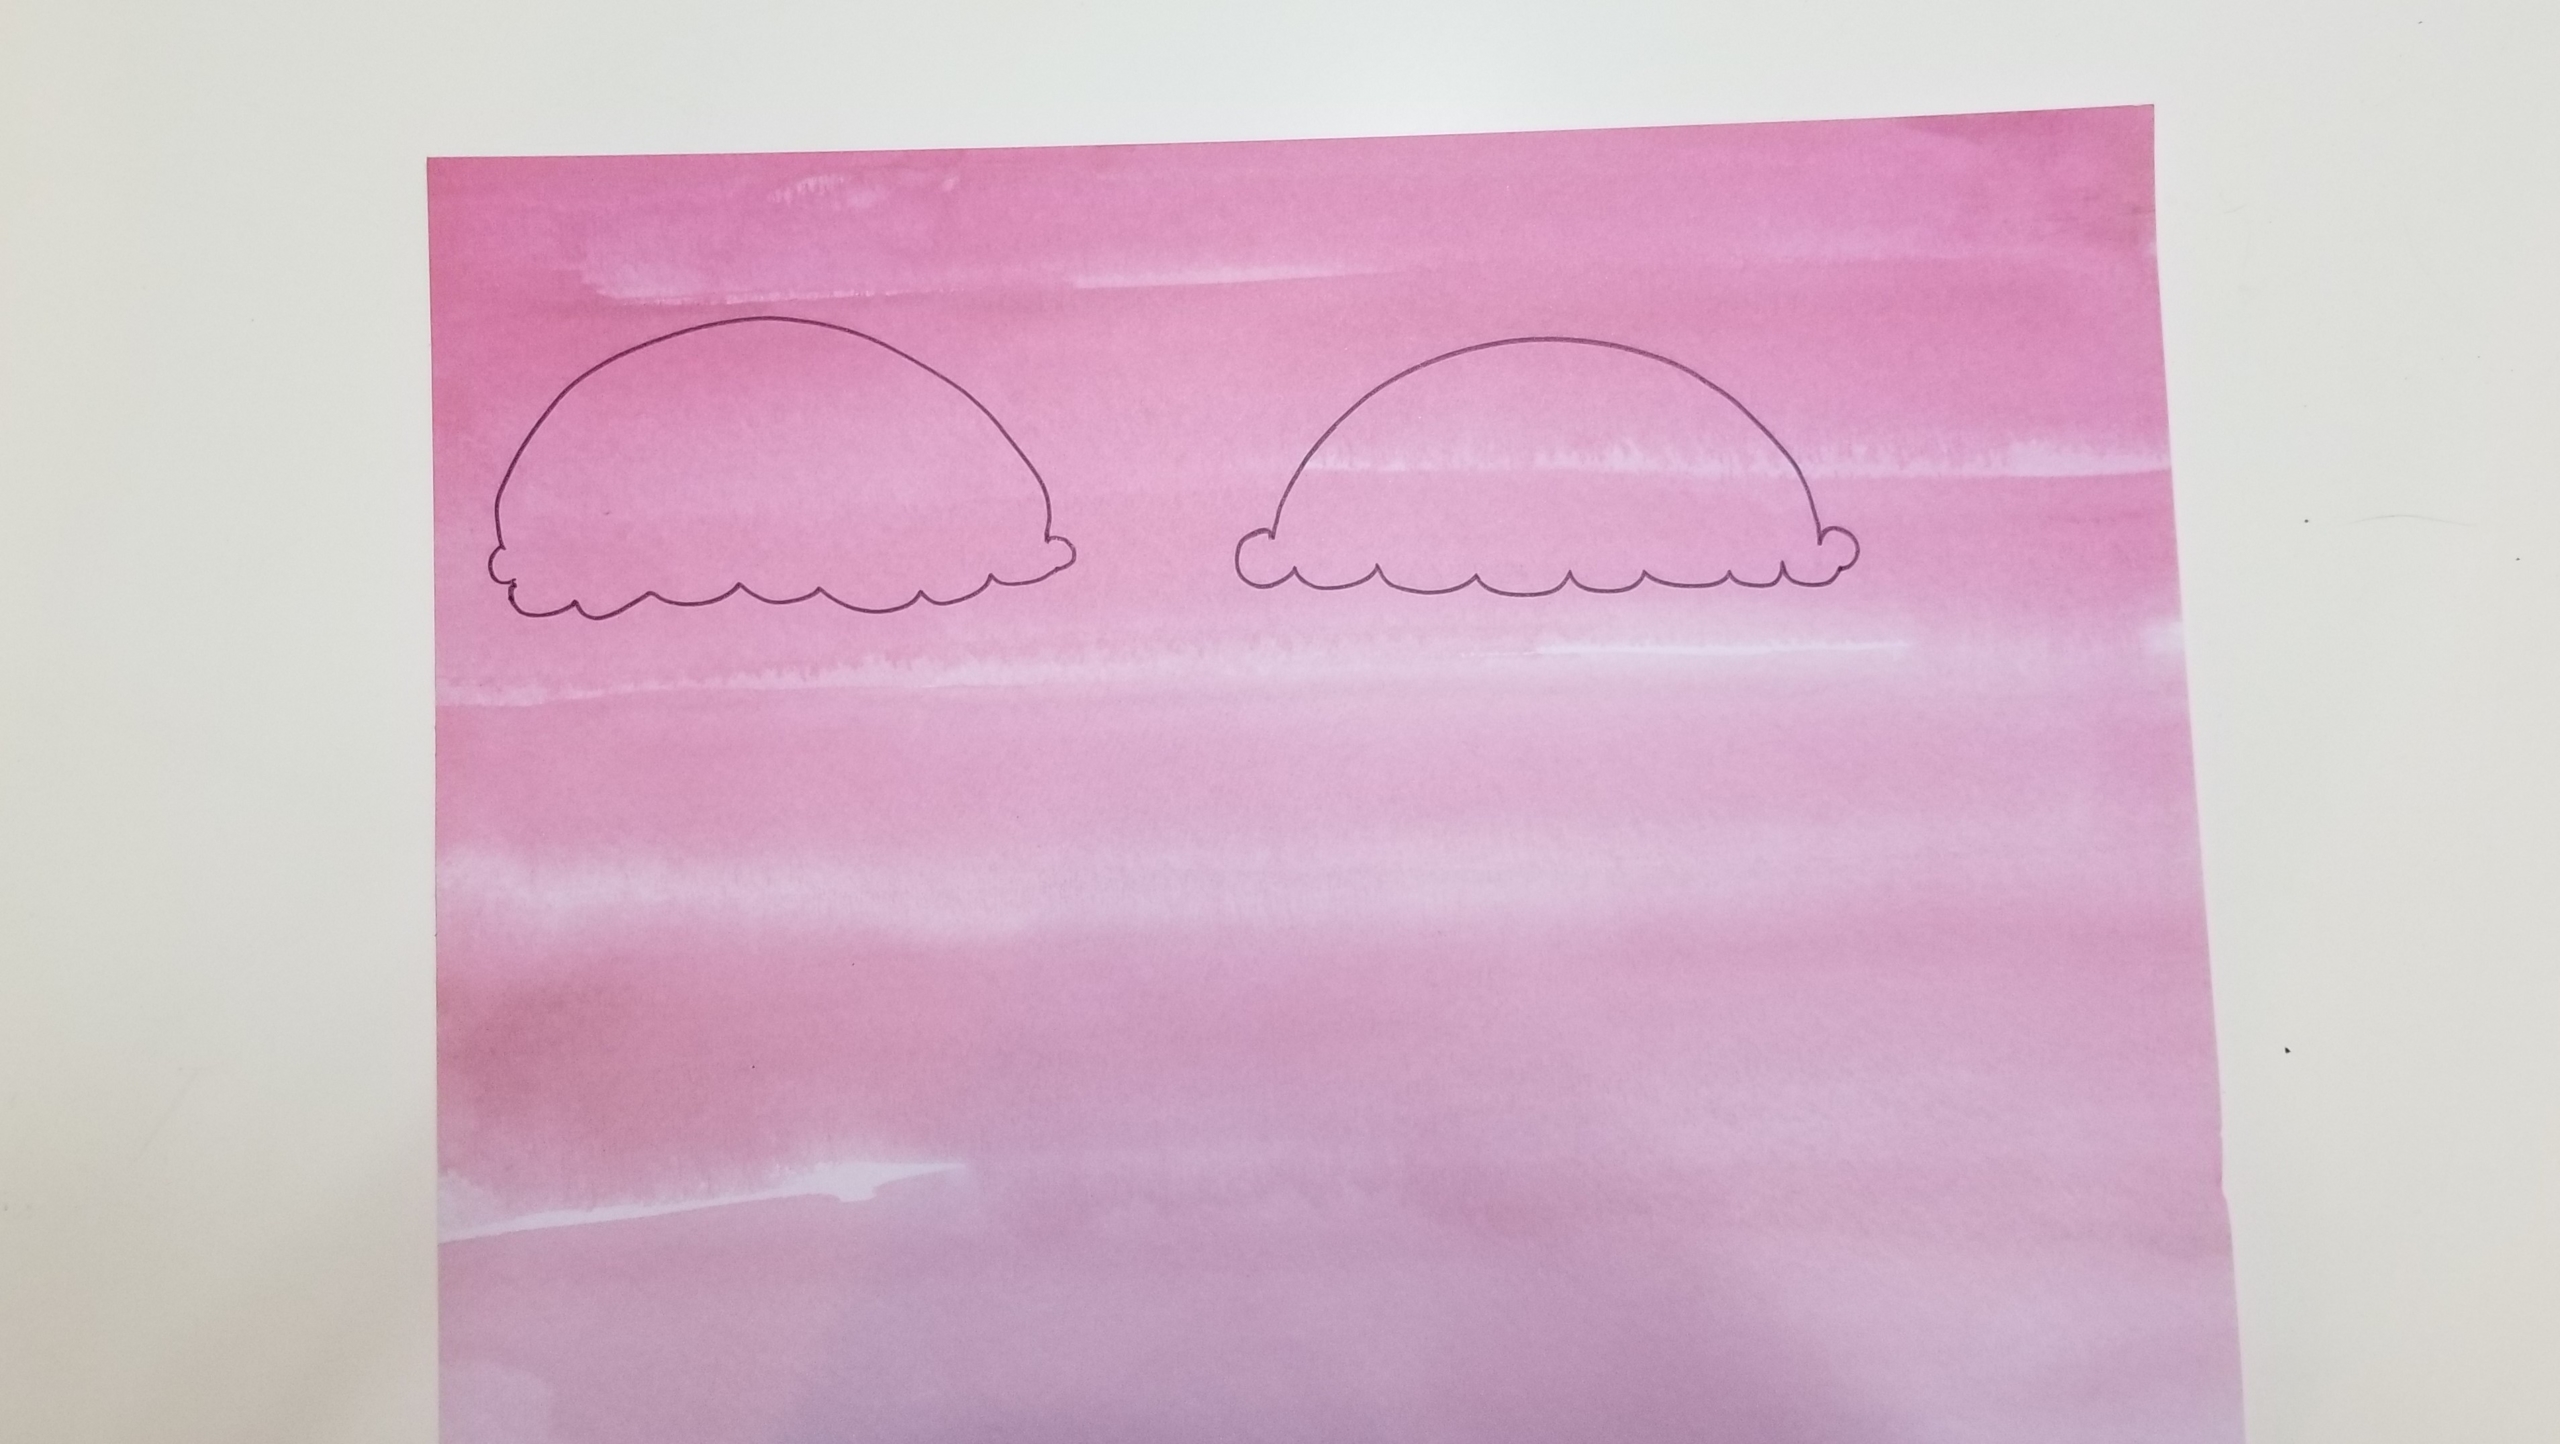 Two ice cream scoops drawn on pink paper